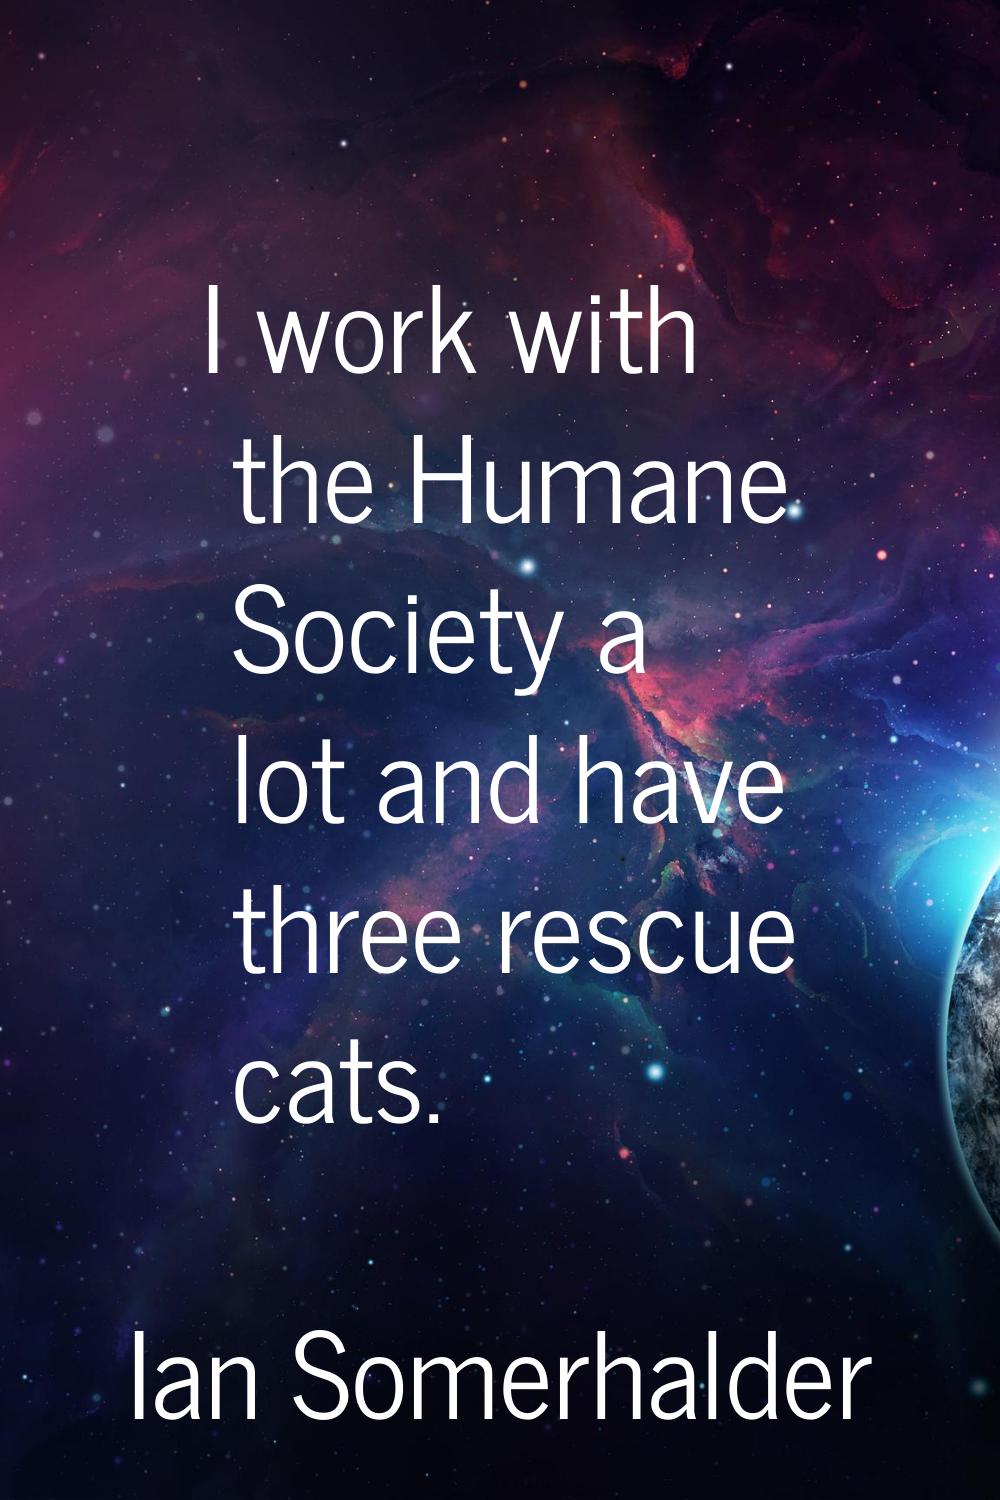 I work with the Humane Society a lot and have three rescue cats.